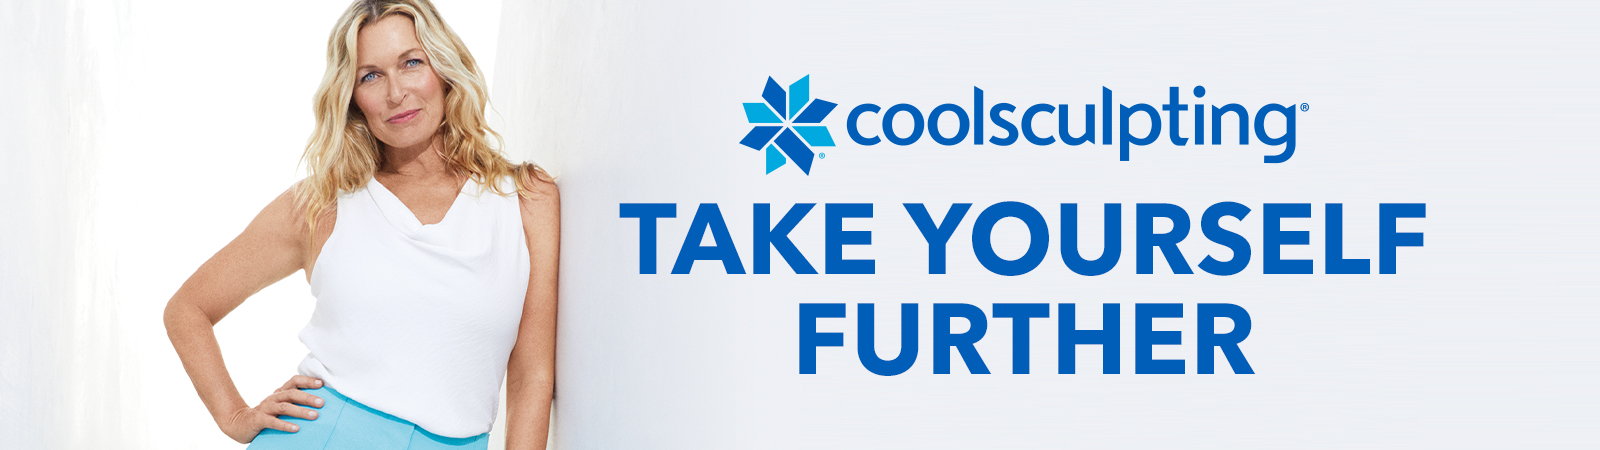 CoolSculpting Take Yourself Further